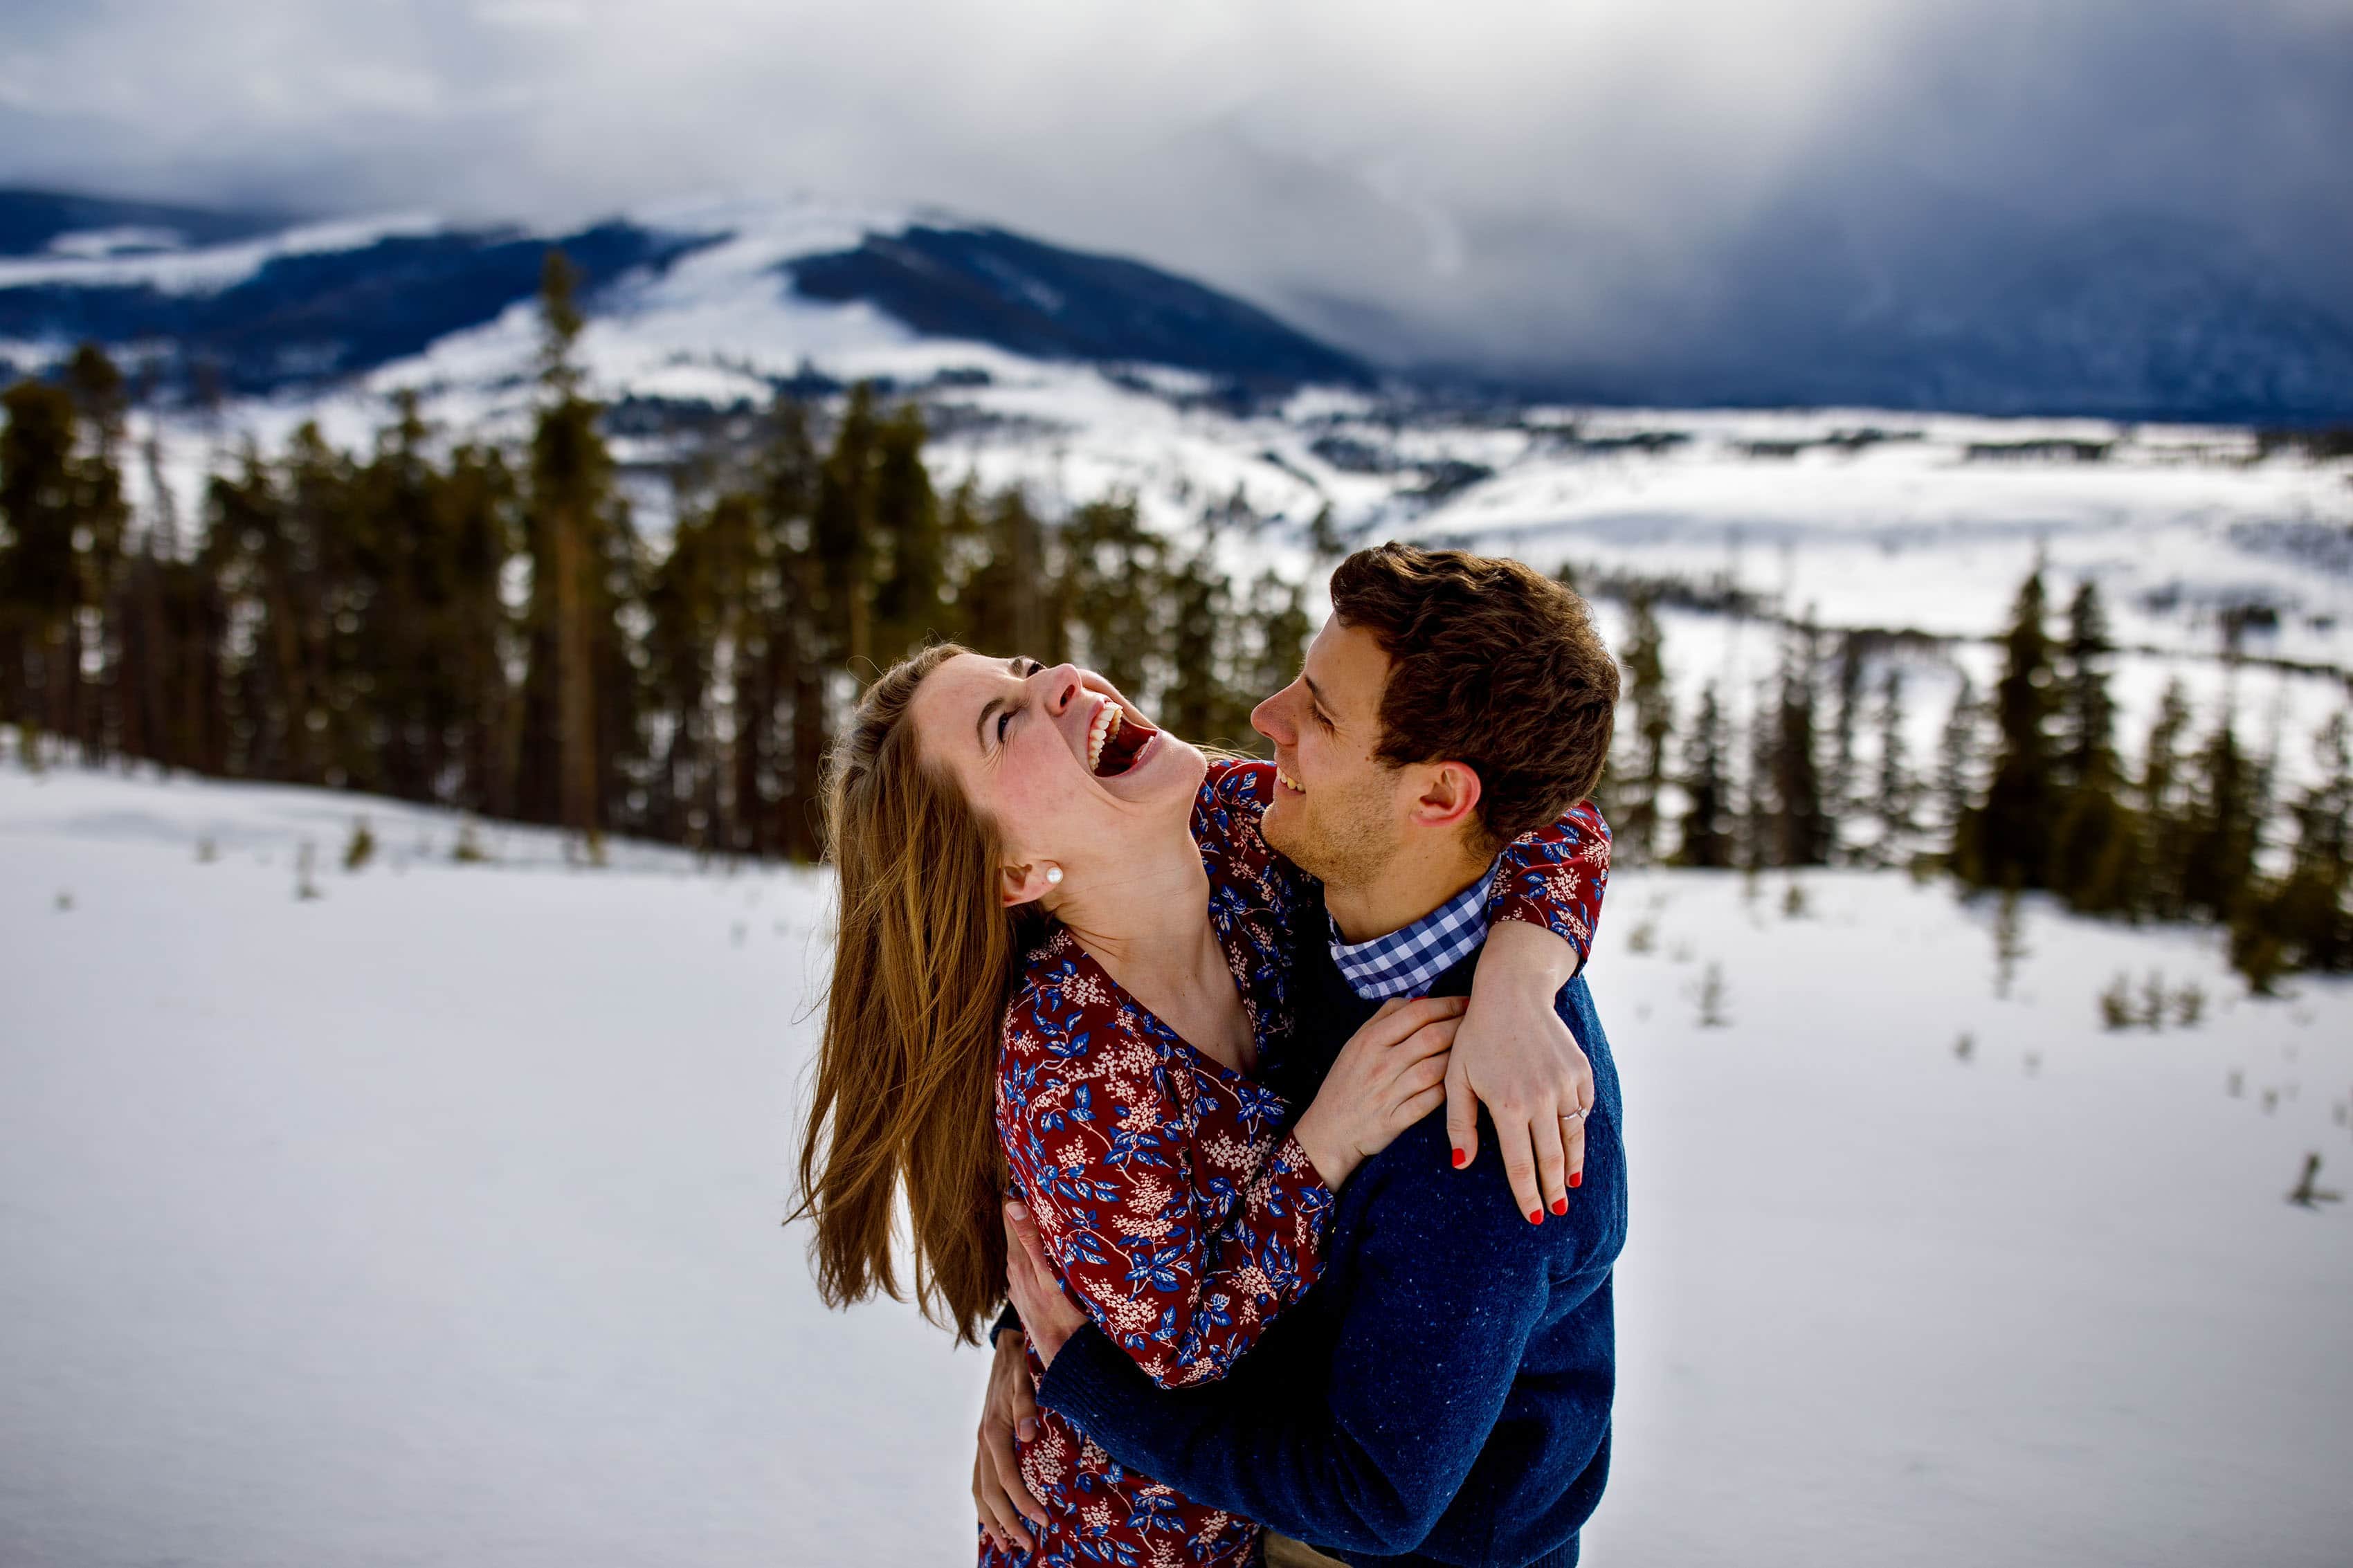 Jessica and Mike share a laugh at Sapphire point during their winter engagement session